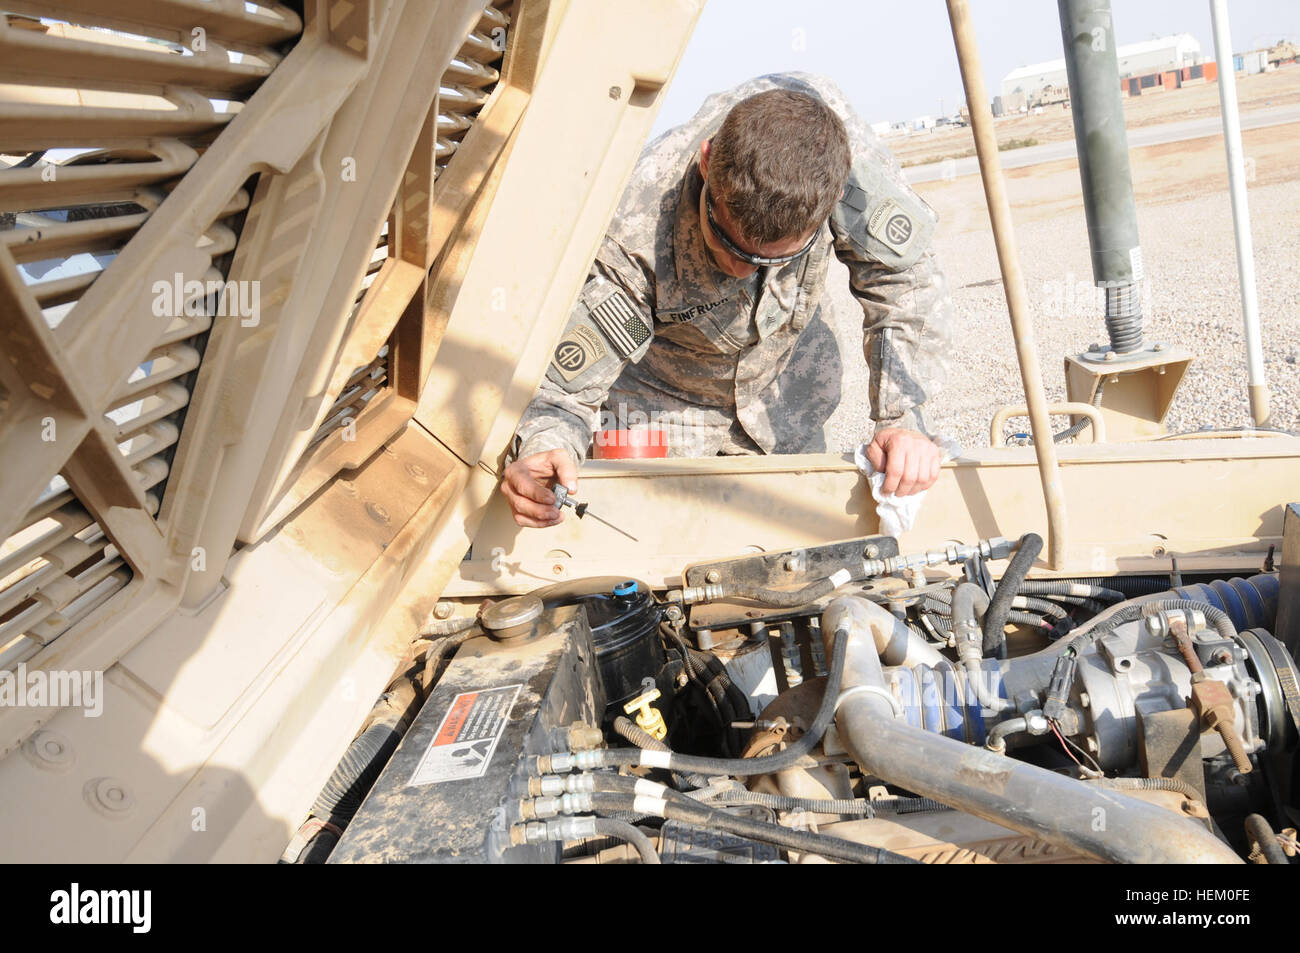 A paratrooper with 2nd Battalion, 319th Airborne Field Artillery Regiment, 2nd Brigade, 82nd Airborne Division checks the oil in his Mine Resistant Ambush Protected vehicle at Contingency Operating Base Adder, Iraq, Nov. 16. American paratroopers bid farewell to Ramadi 491209 Stock Photo